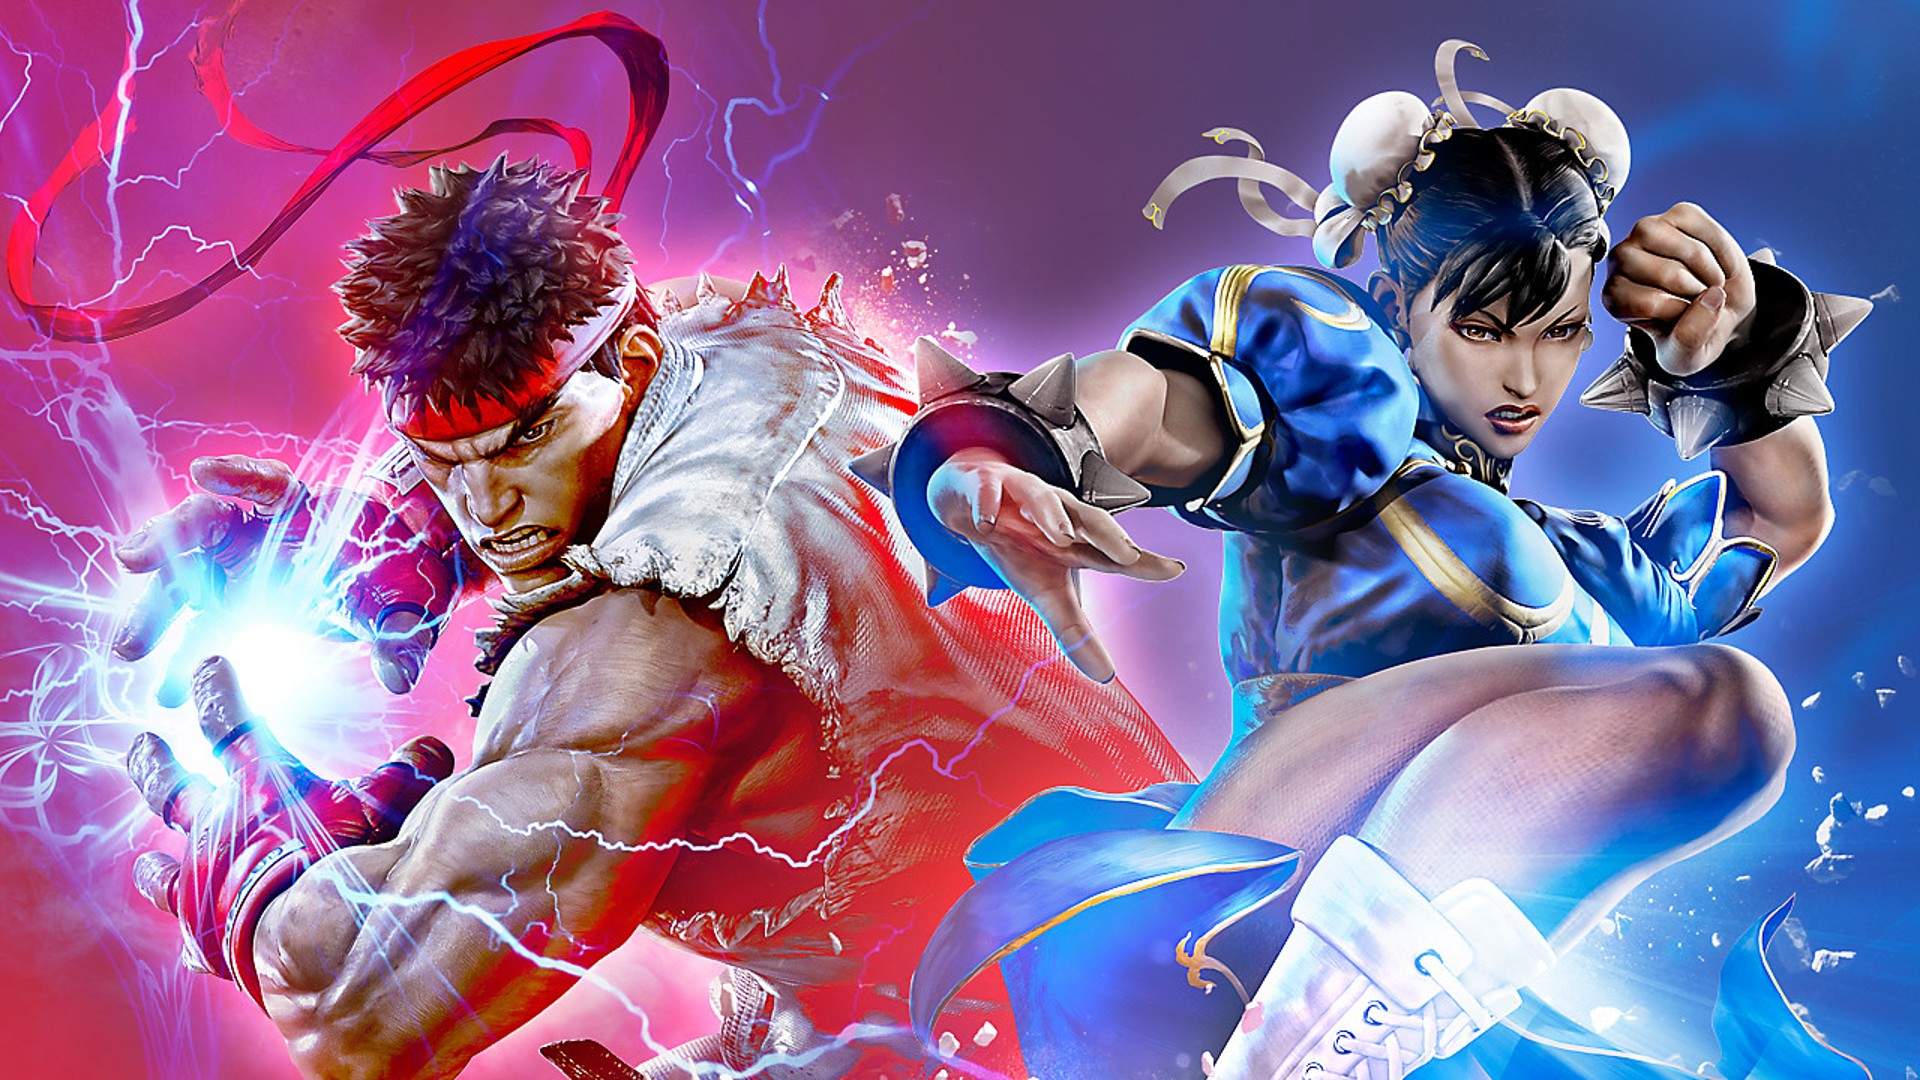 Capcom has to get Street Fighter 6 right, and not just for the